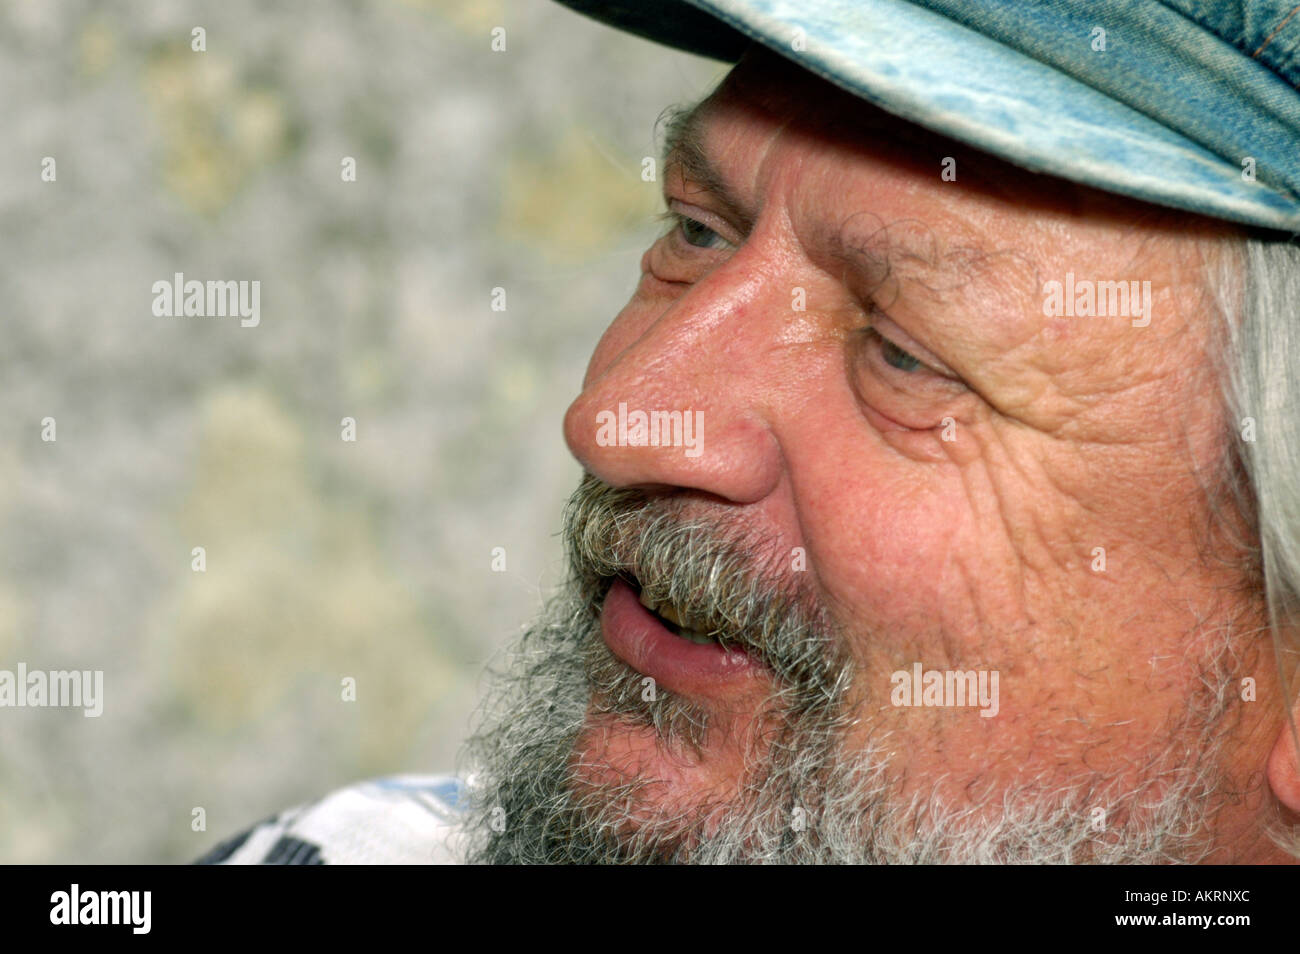 portrait of a bearded man in age of about 55 to 65 years with a peaked cap Stock Photo